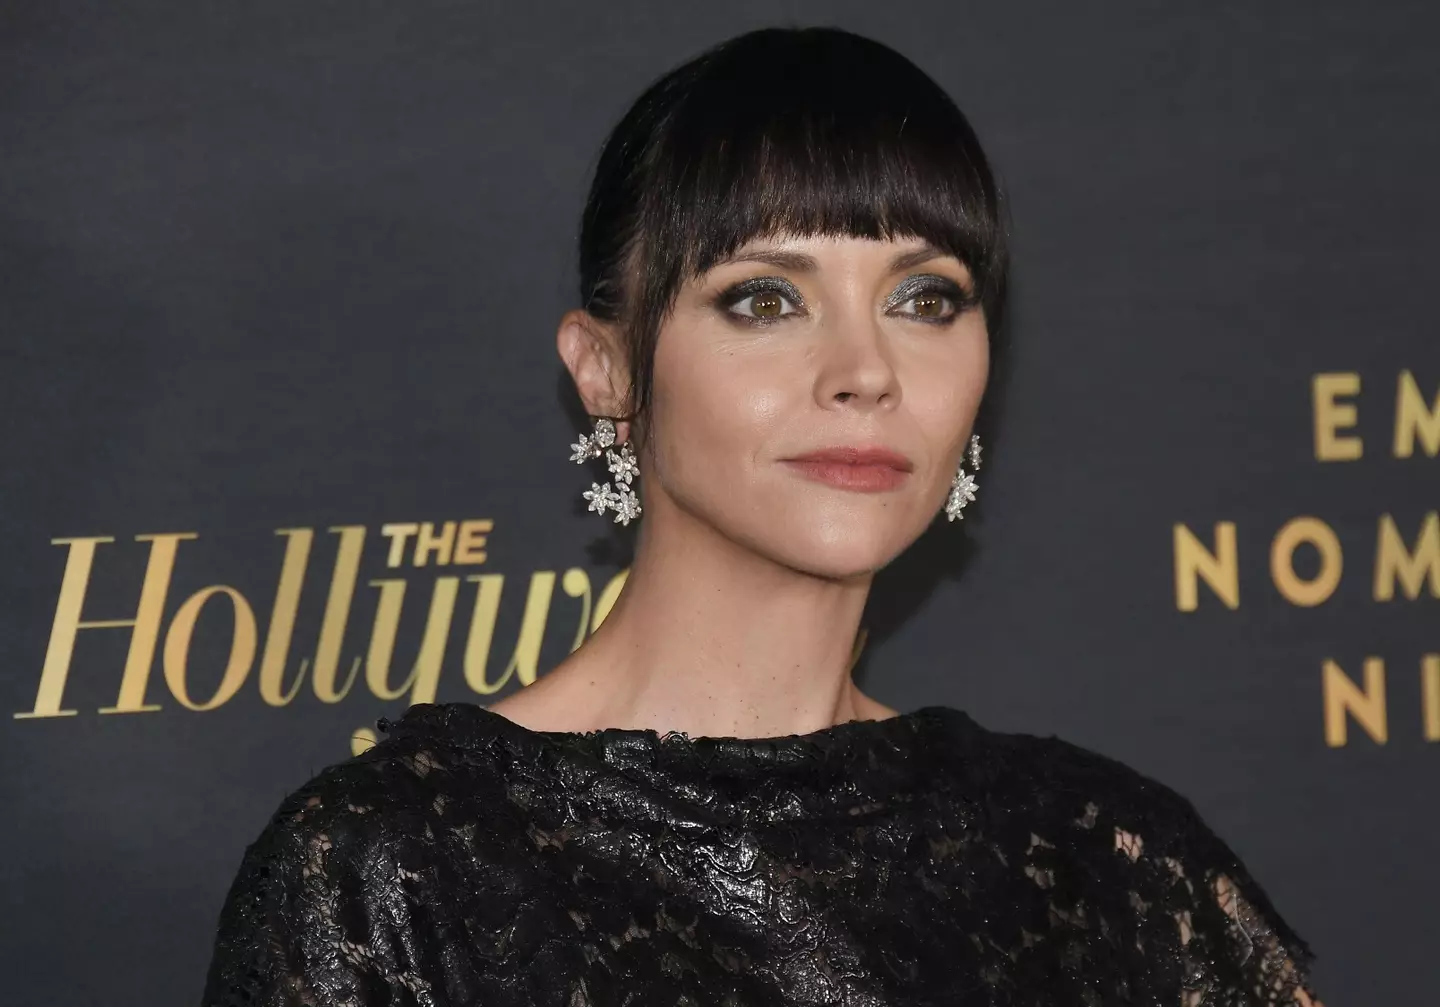 Christina Ricci has revealed that acting was an 'escape' as a child.